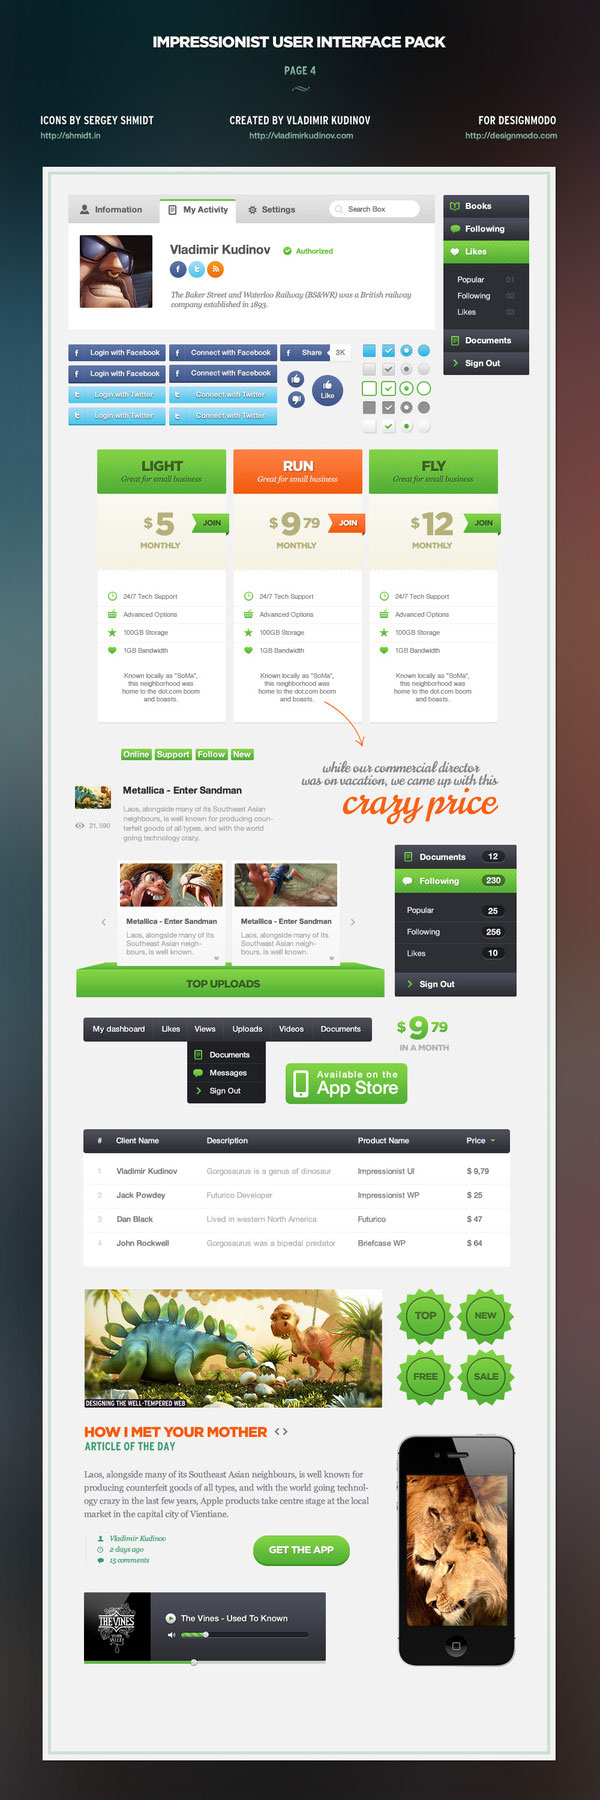 Impressionist User Interface Pack Page 4